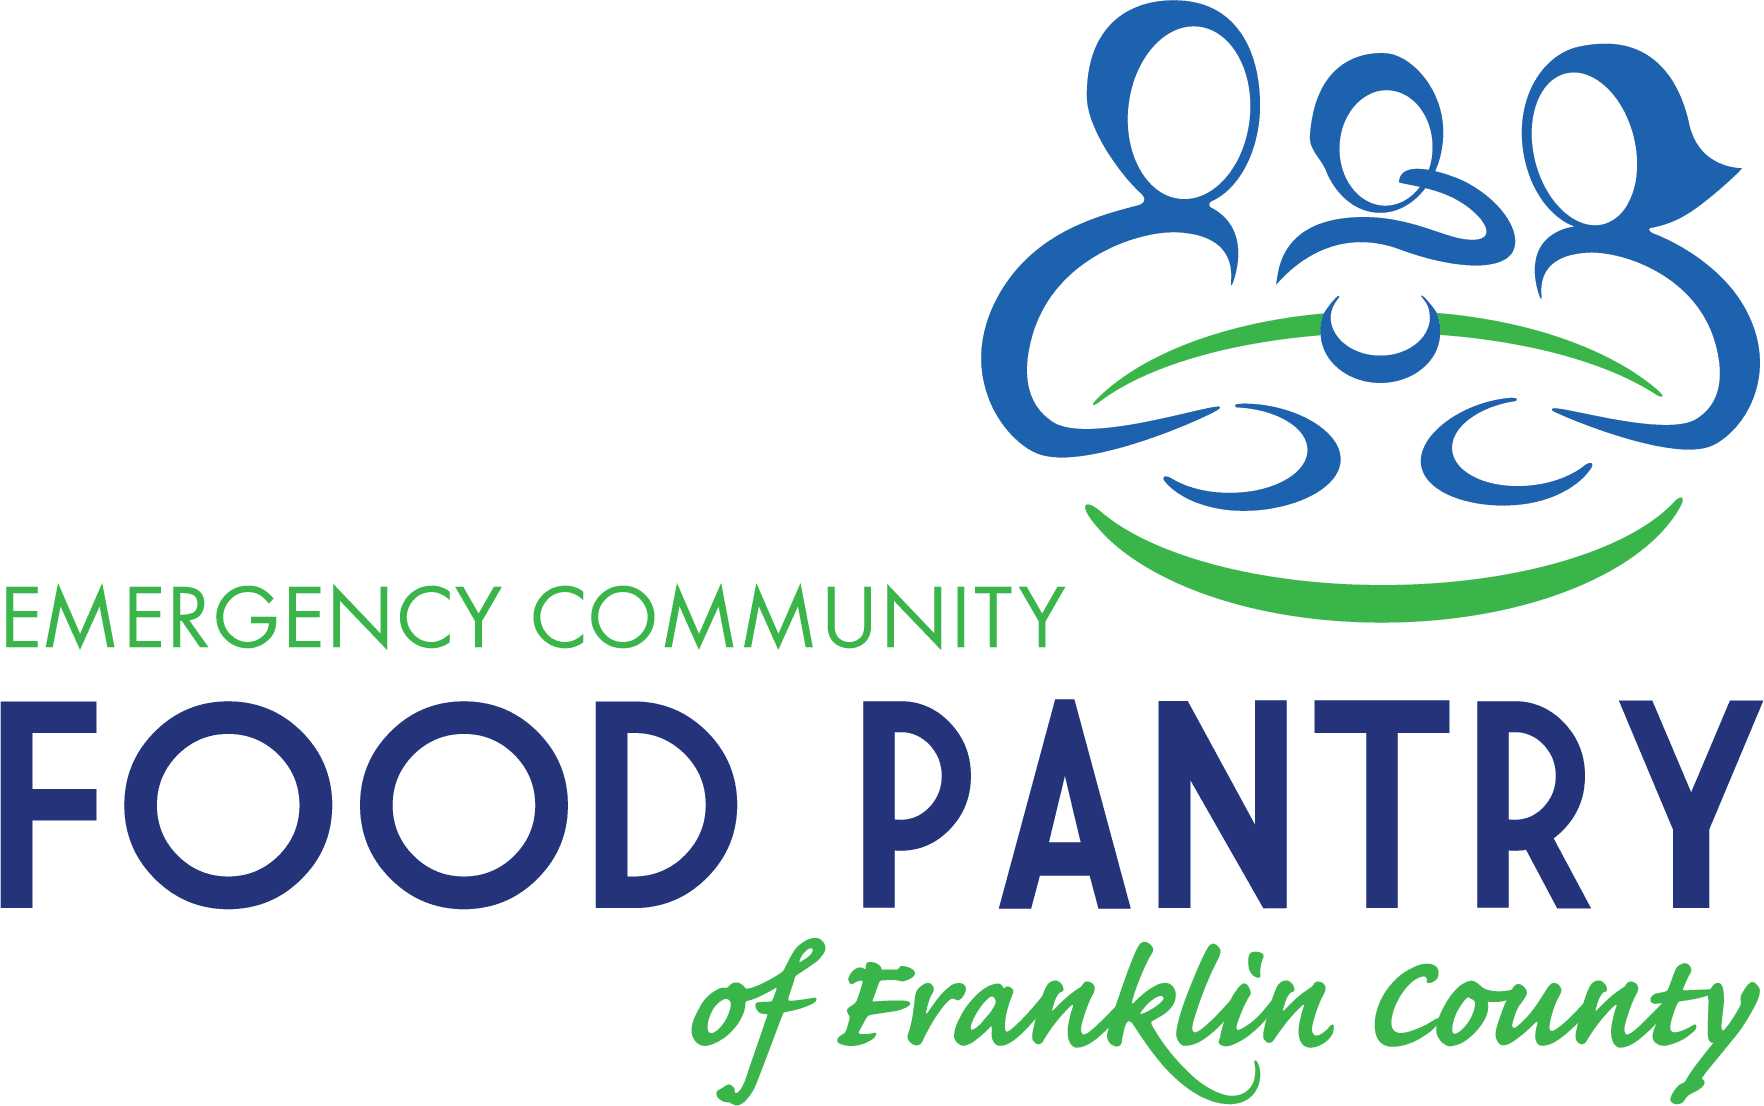 Emergency Food Pantry of Franklin County